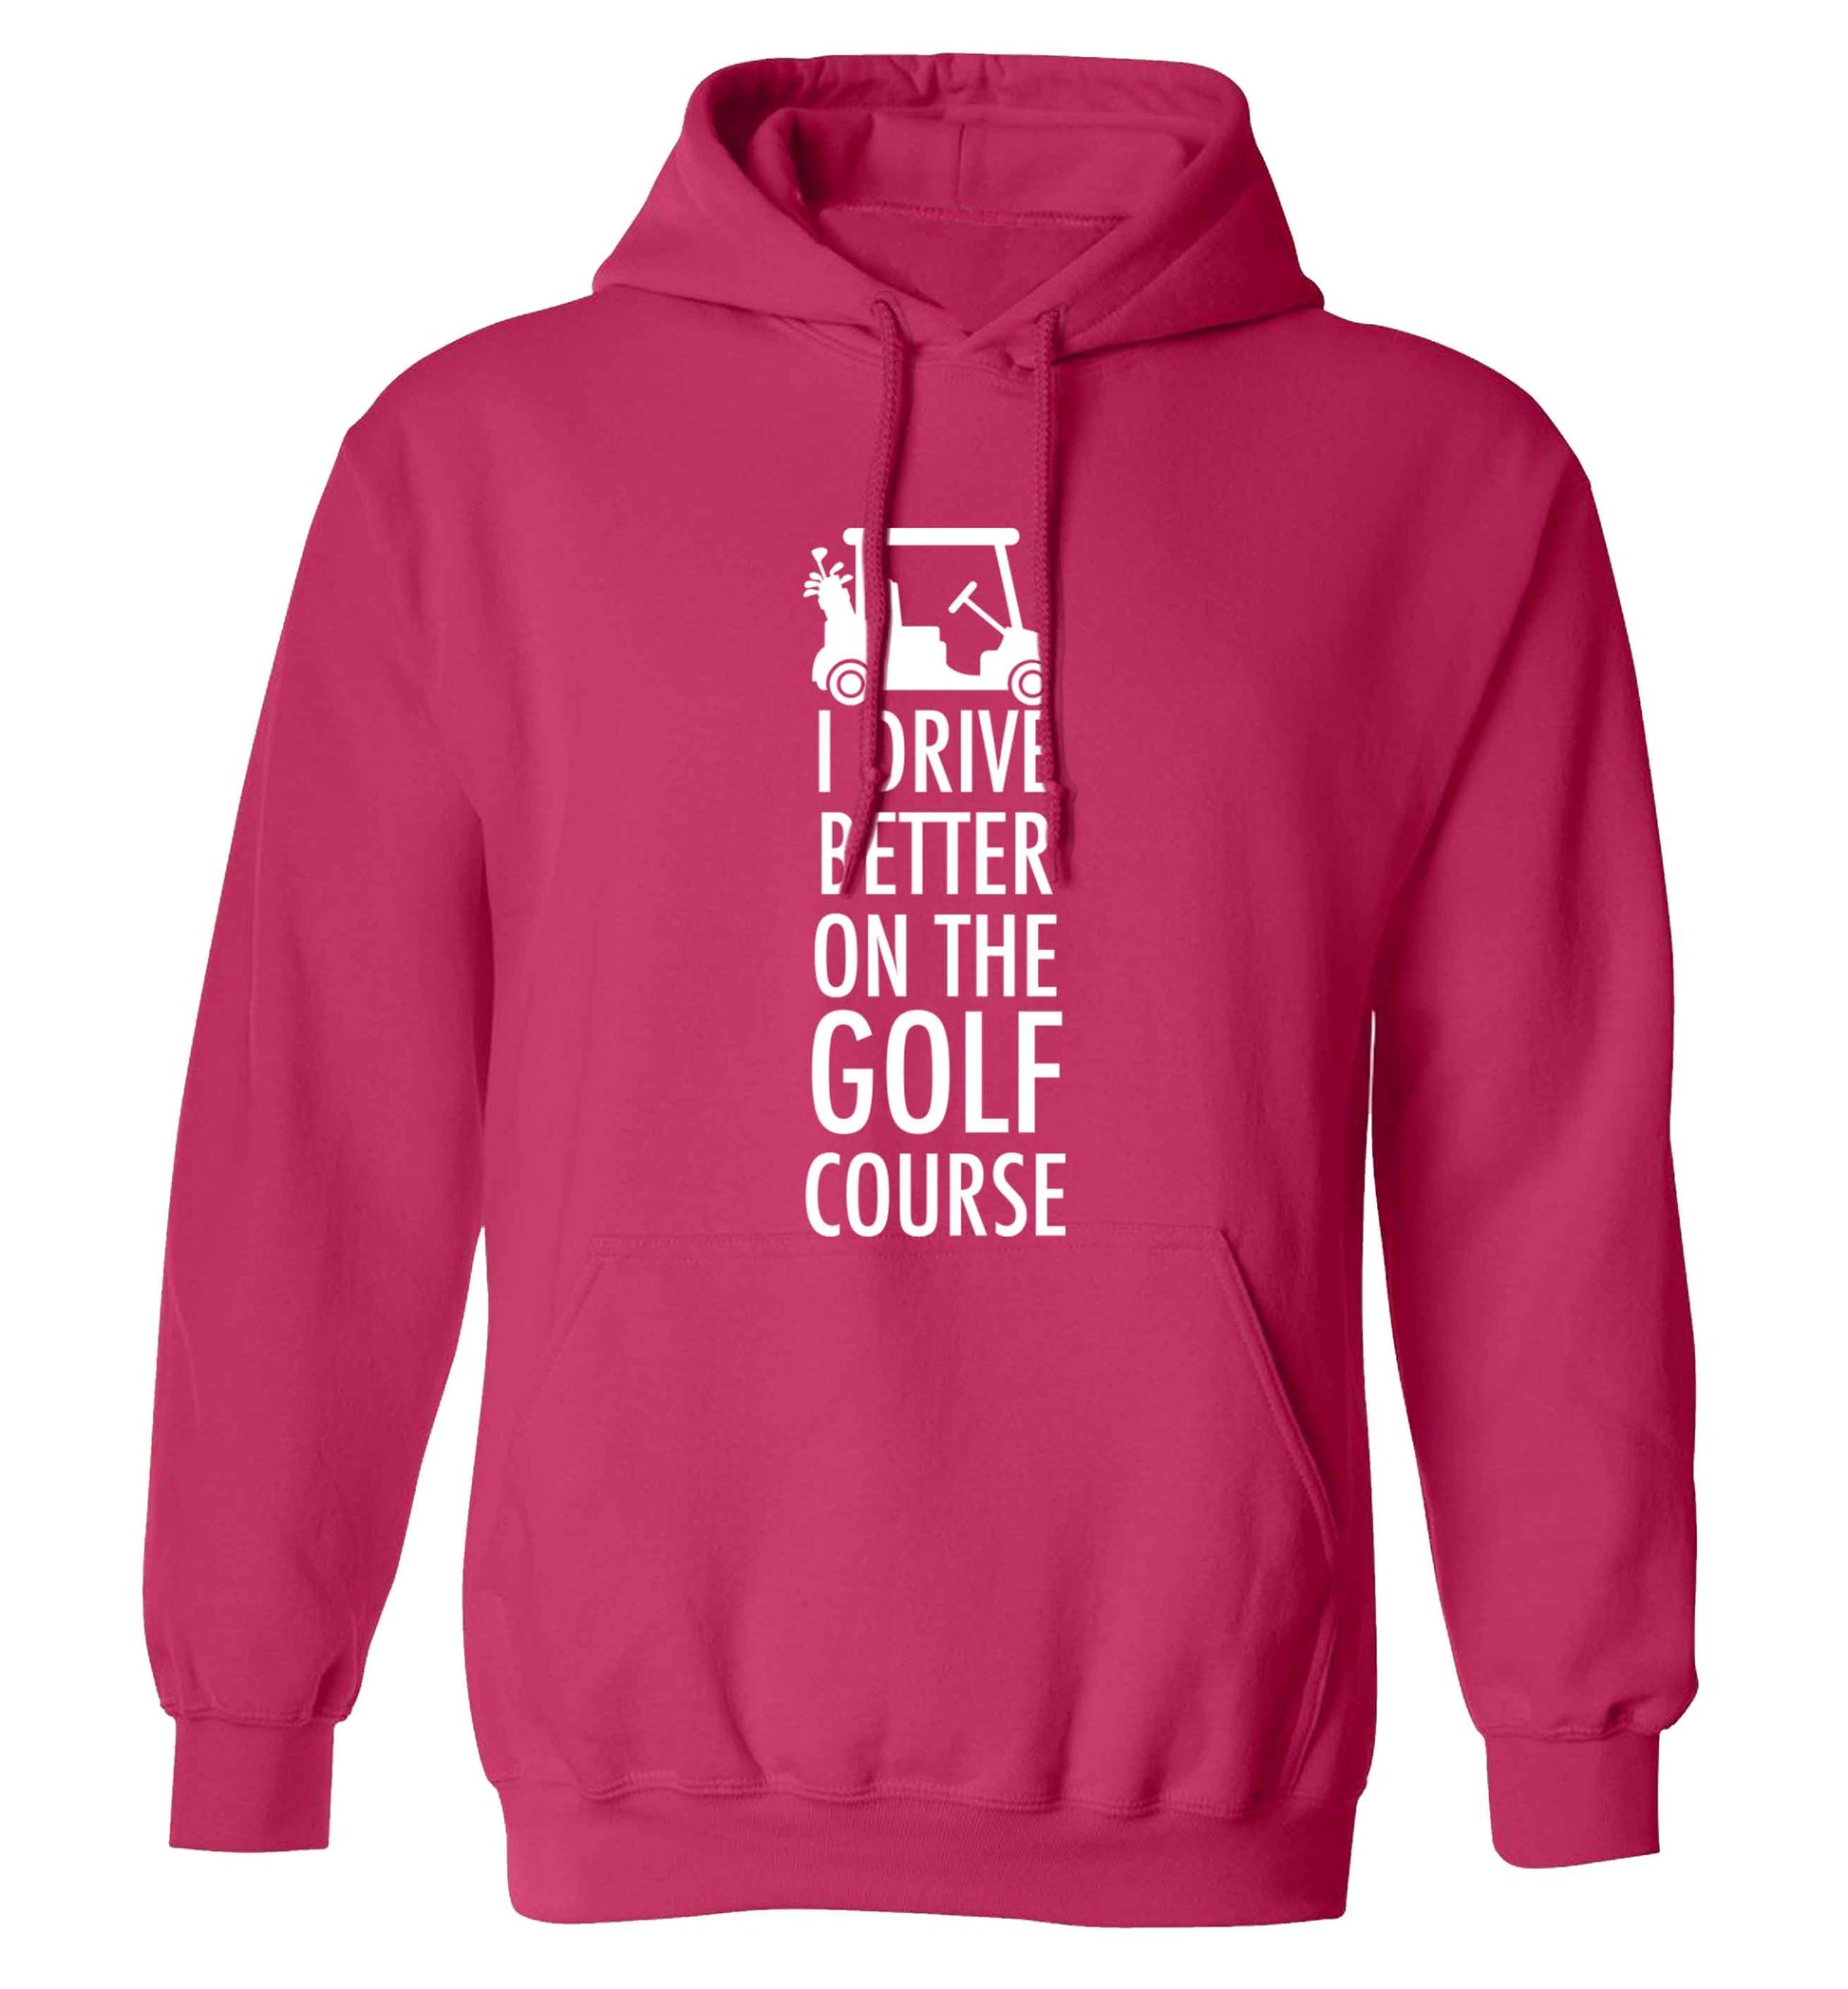 I drive better on the golf course adults unisex pink hoodie 2XL